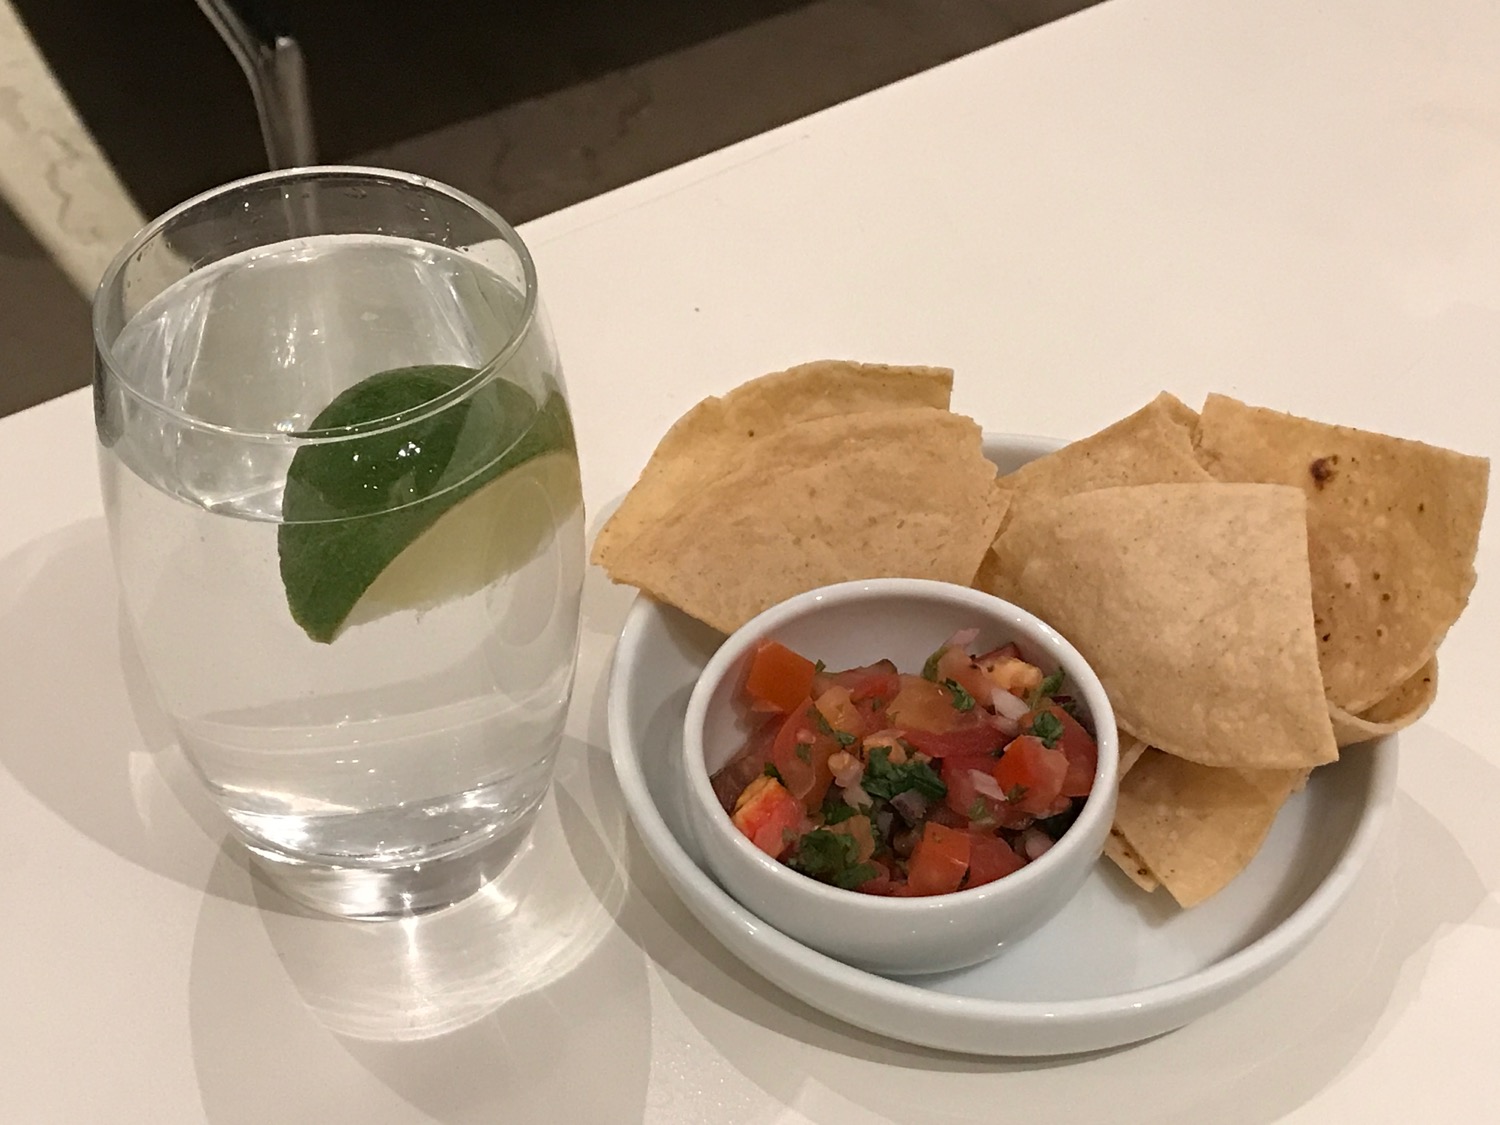 a plate of chips and salsa on a white plate next to a glass of water